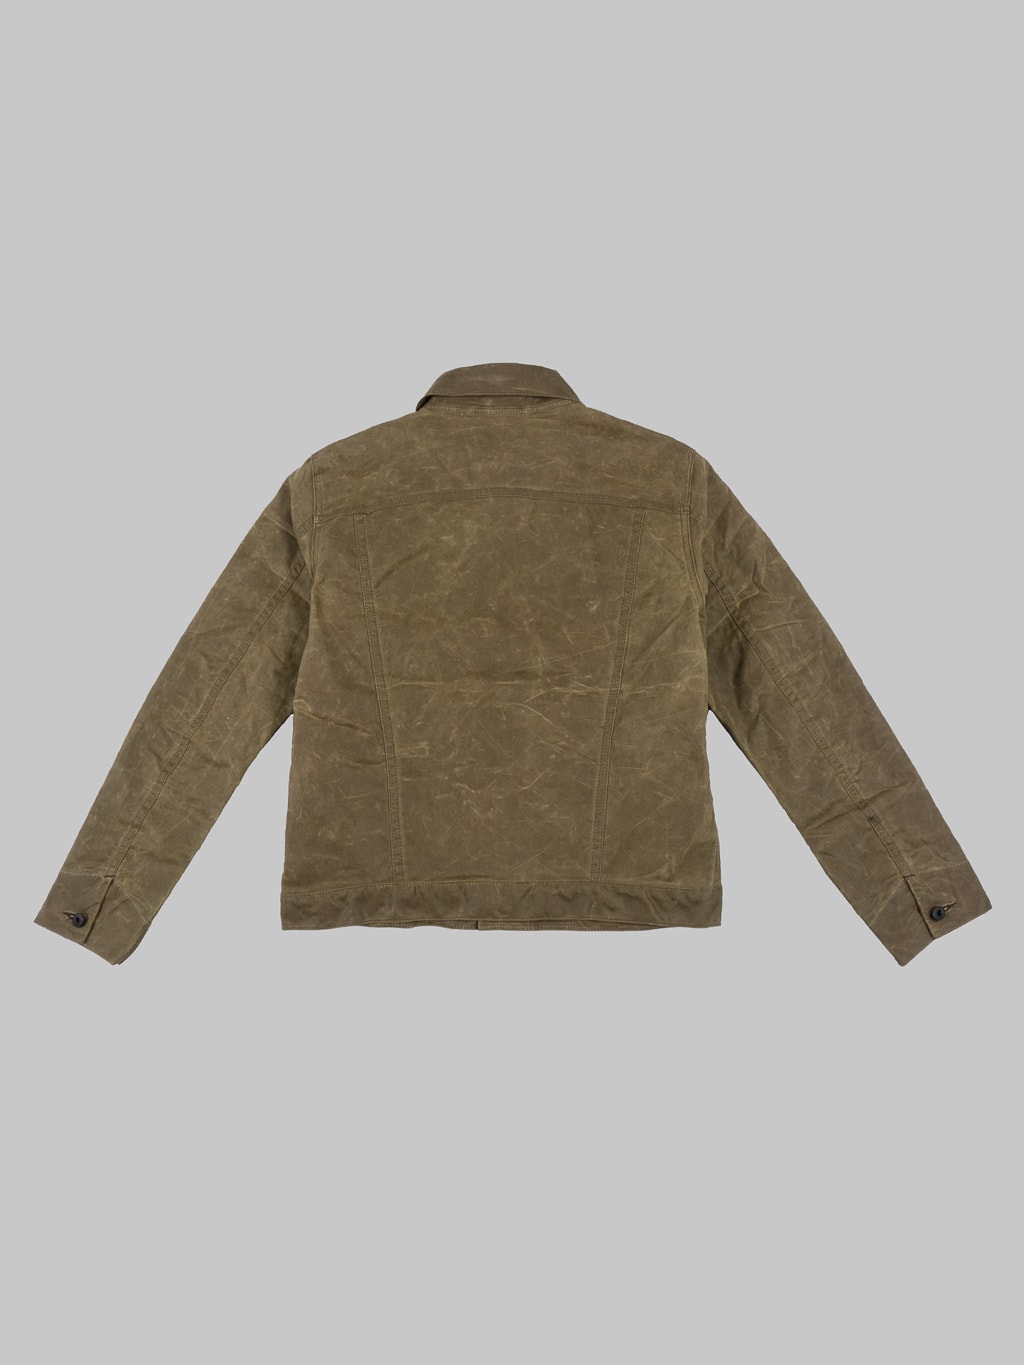 Rogue Territory Supply Jacket Lined Brown Ridgeline back